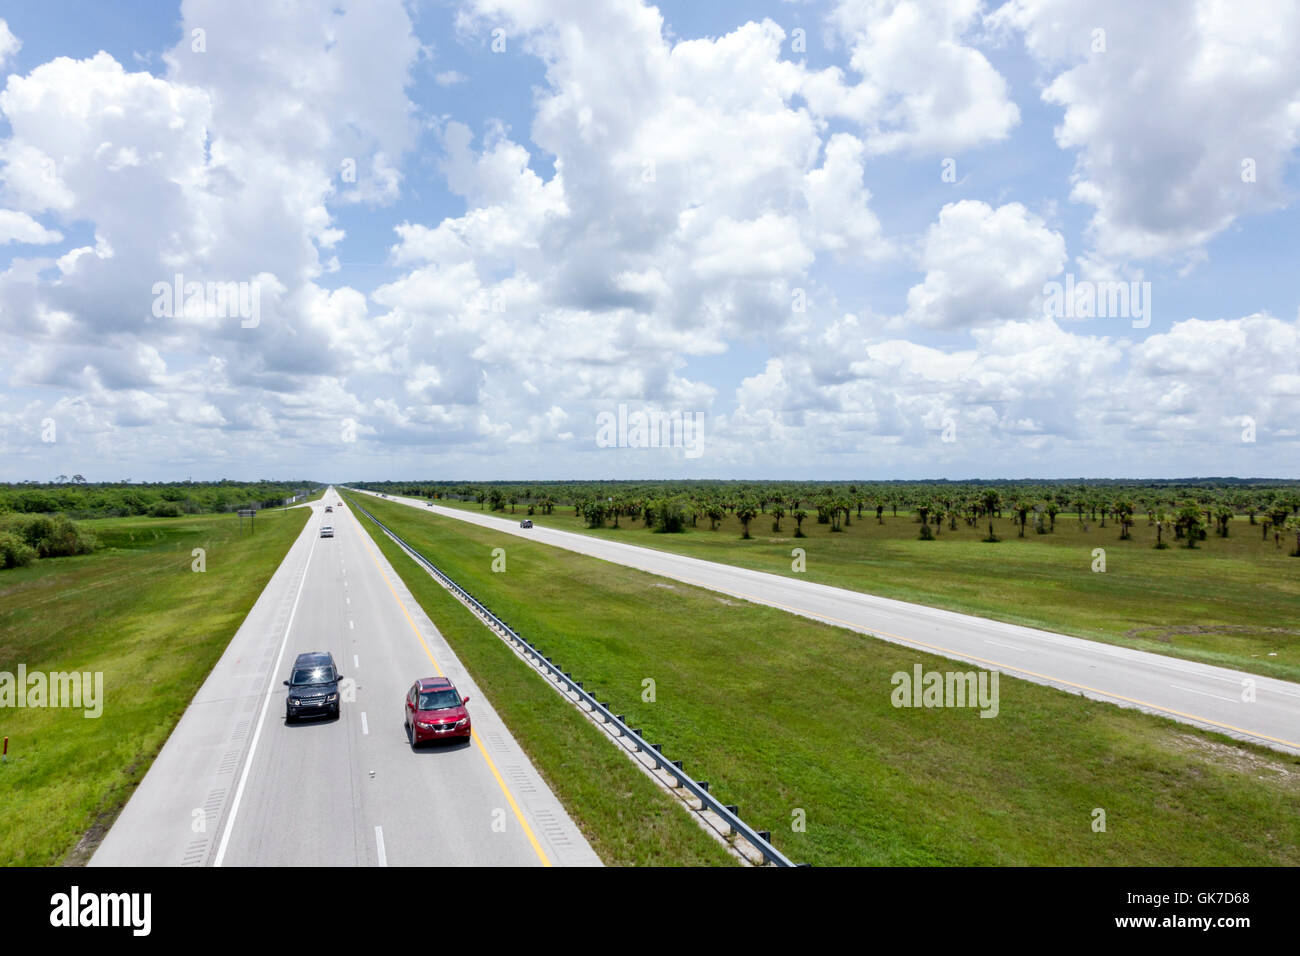 Florida Collier County,Interstate 75,I-75,Interstate Highway System,Everglades,State Road 29,view from overpass,panoramic view,Alligator Alley,tolled Stock Photo